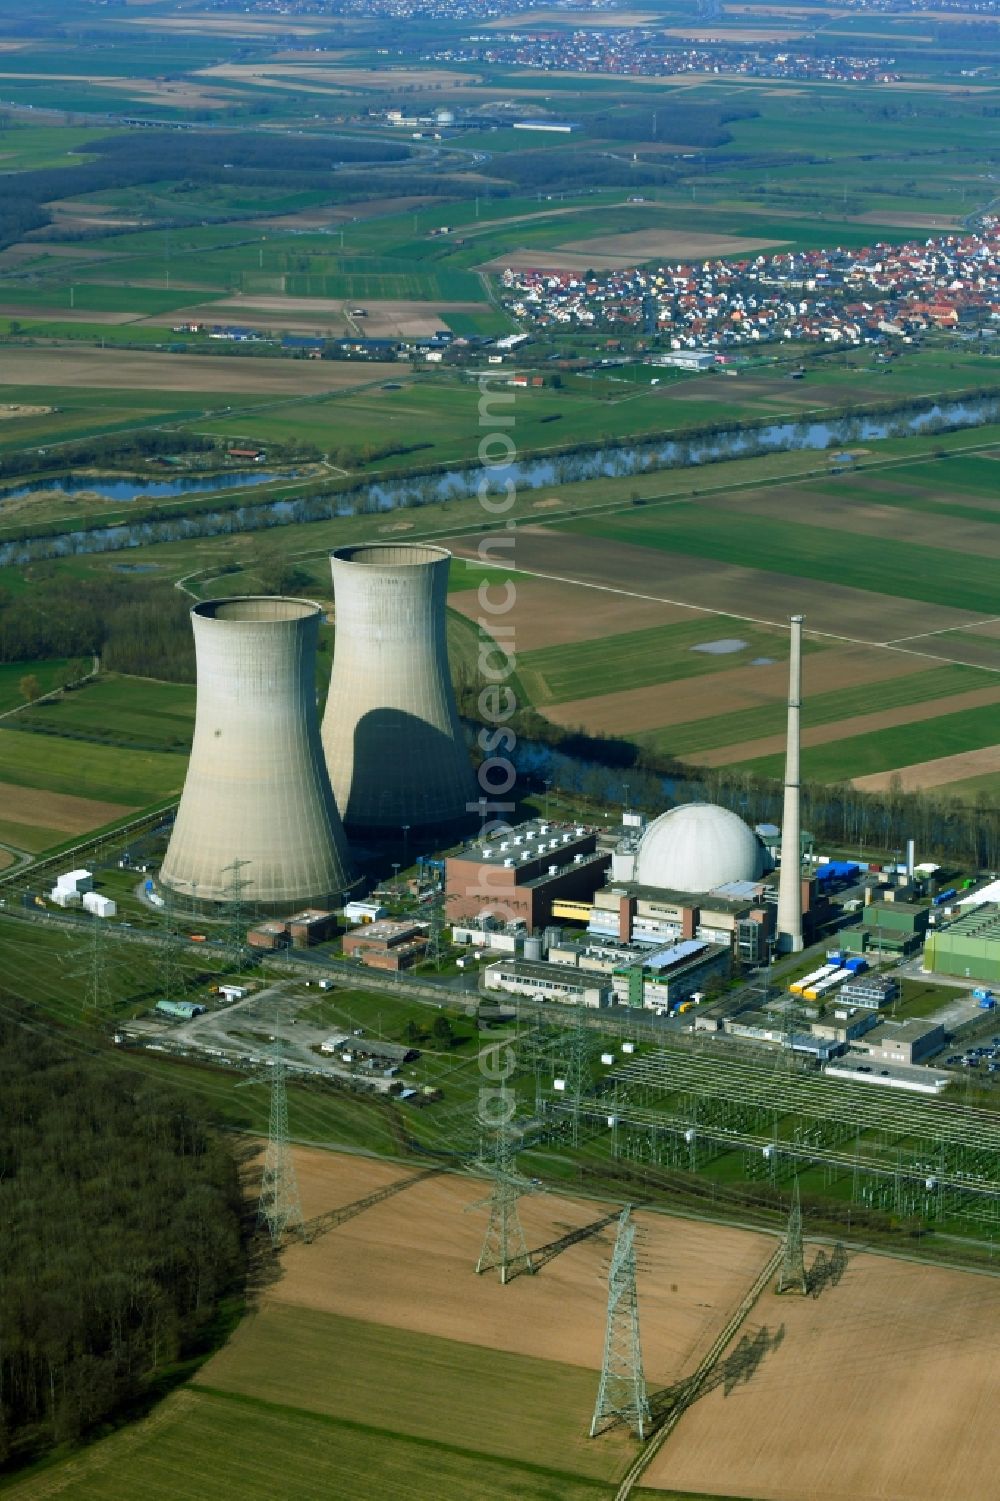 Grafenrheinfeld from above - Reactor blocks, cooling tower structures and plants of the nuclear power plant - nuclear power plant AKW - KKW in Grafenrheinfeld in the state Bavaria, Germany